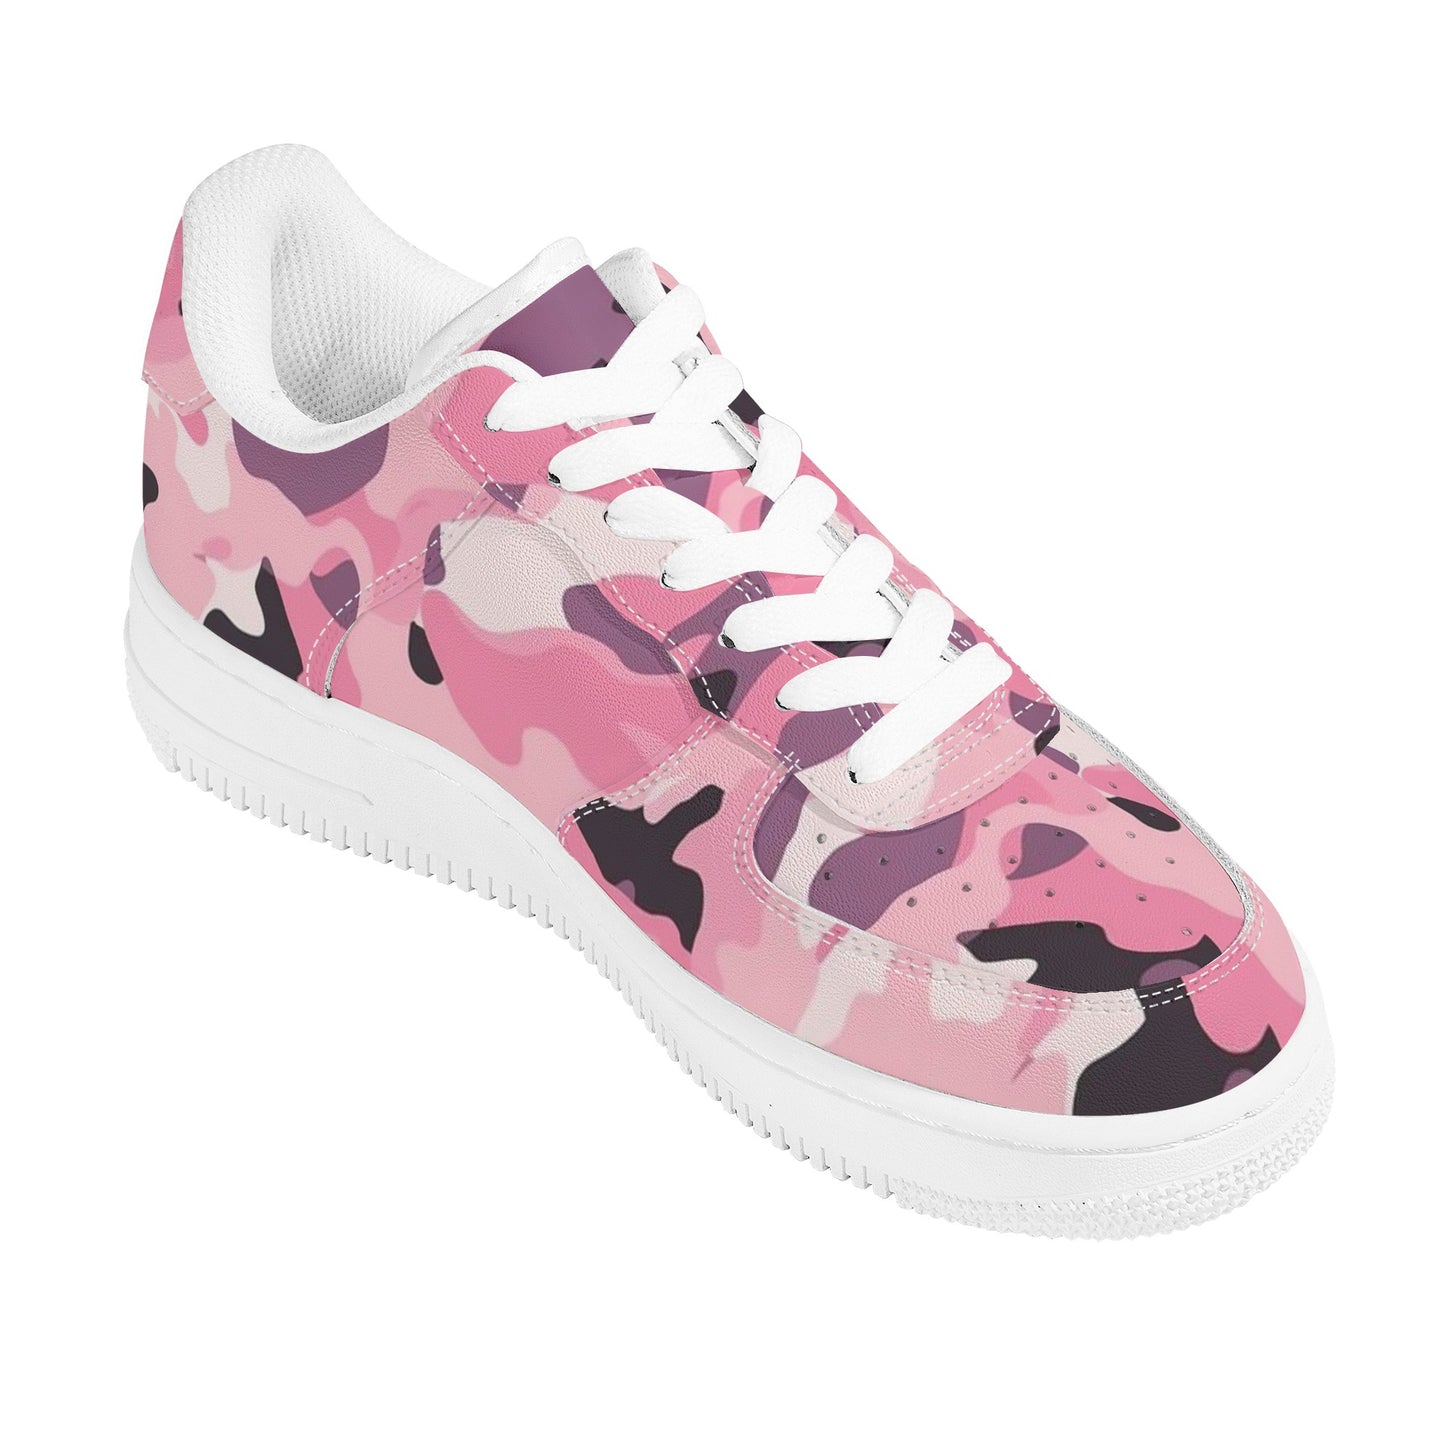 Pink Camo Women Vegan Leather Shoes, Camouflage Sneakers White Low Top Lace Up Custom Girls Aesthetic Flat Ladies Starcove Fashion